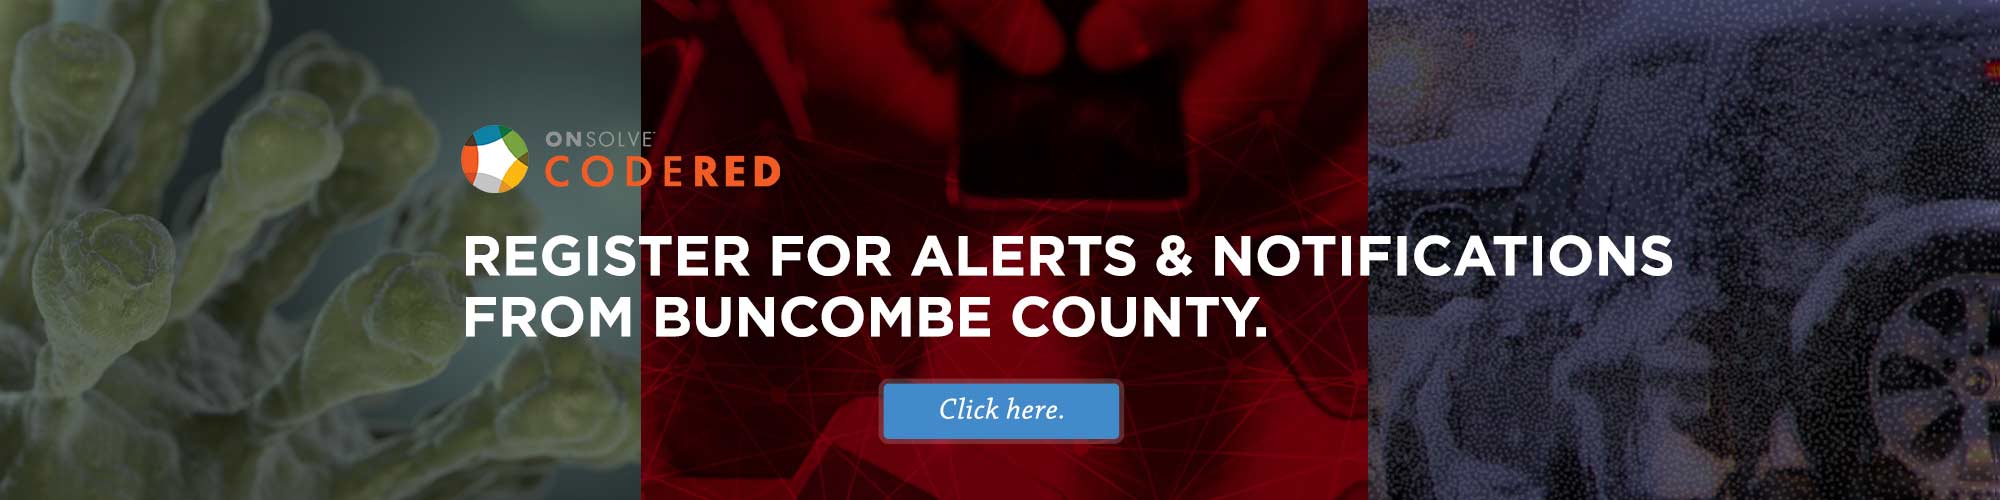 Sign up for CodeRED alerts & notifications from Buncombe County.